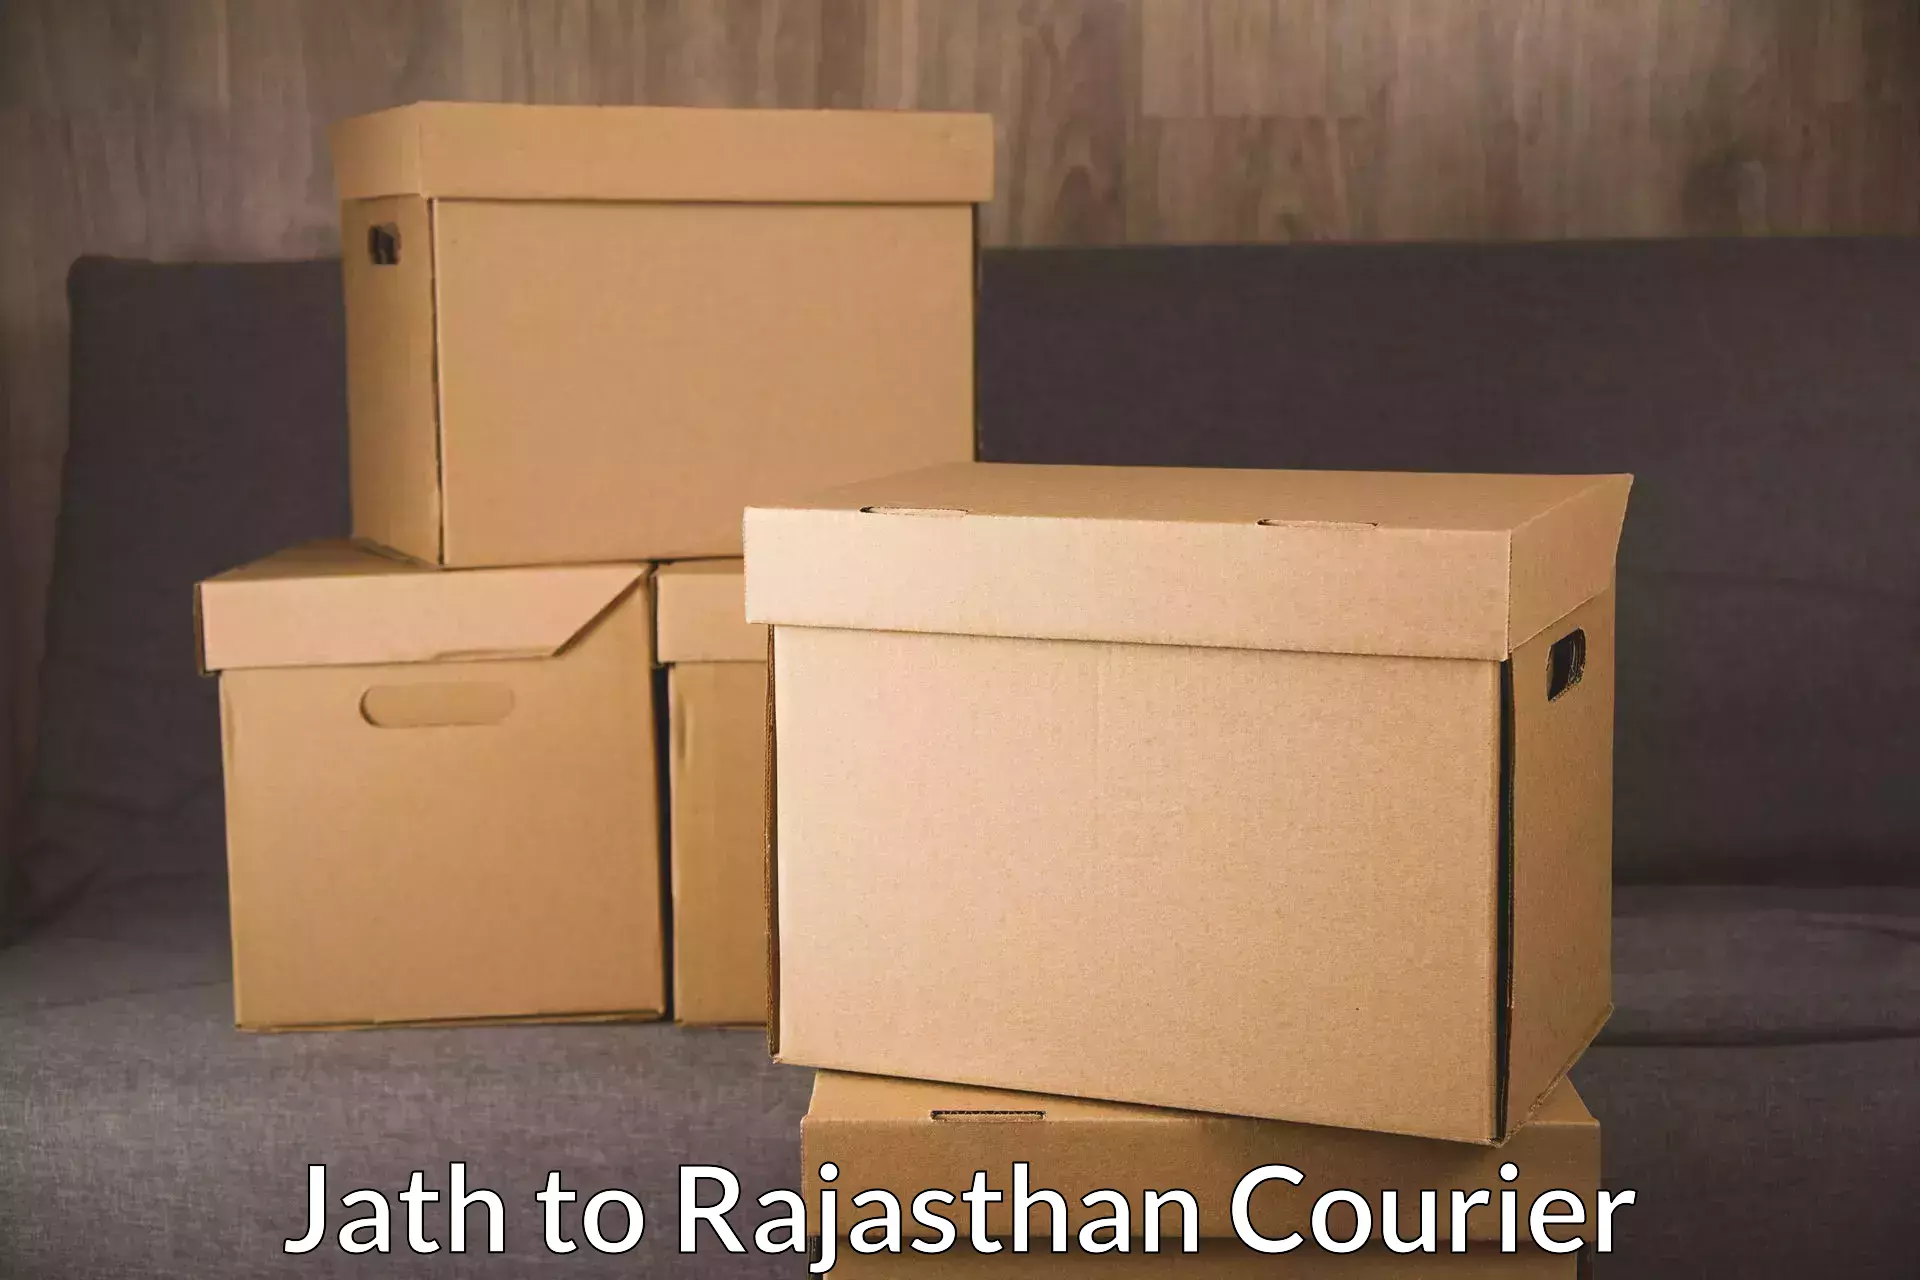 Next day courier Jath to Udaipur